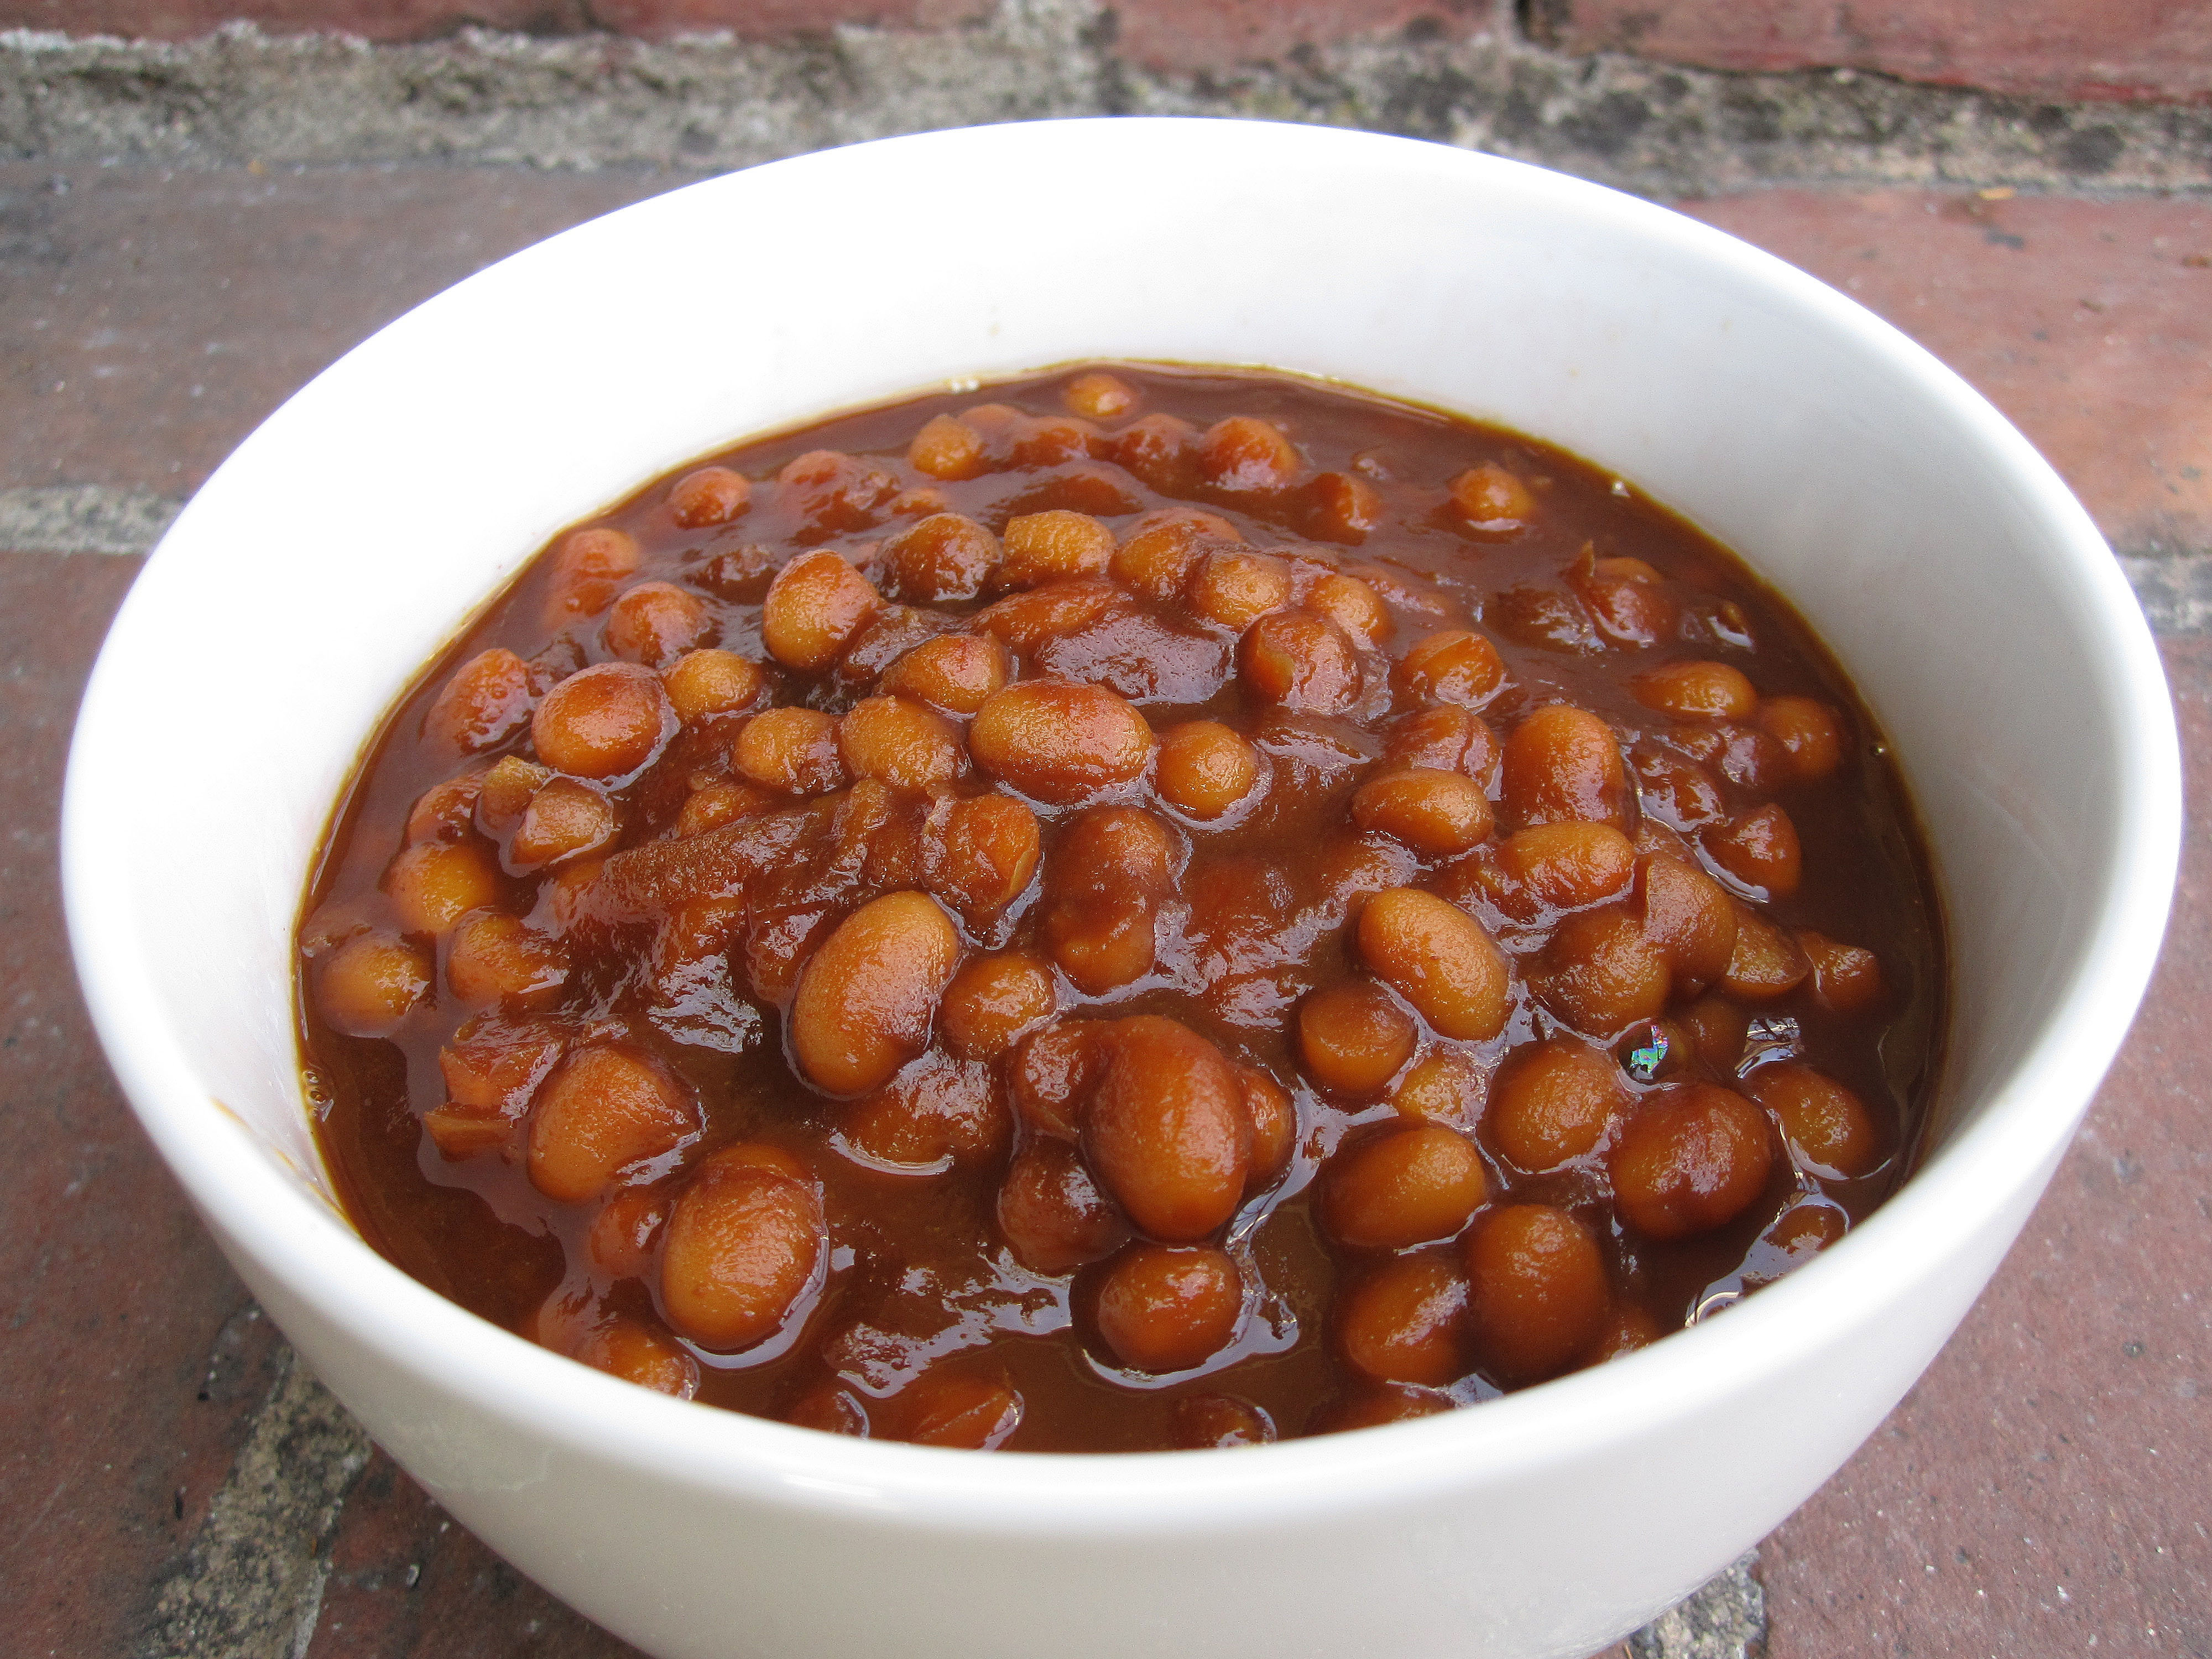 Baked Bean Recipes Vegetarian
 Tomato Baked Beans If You Have Time Better Than Heinz